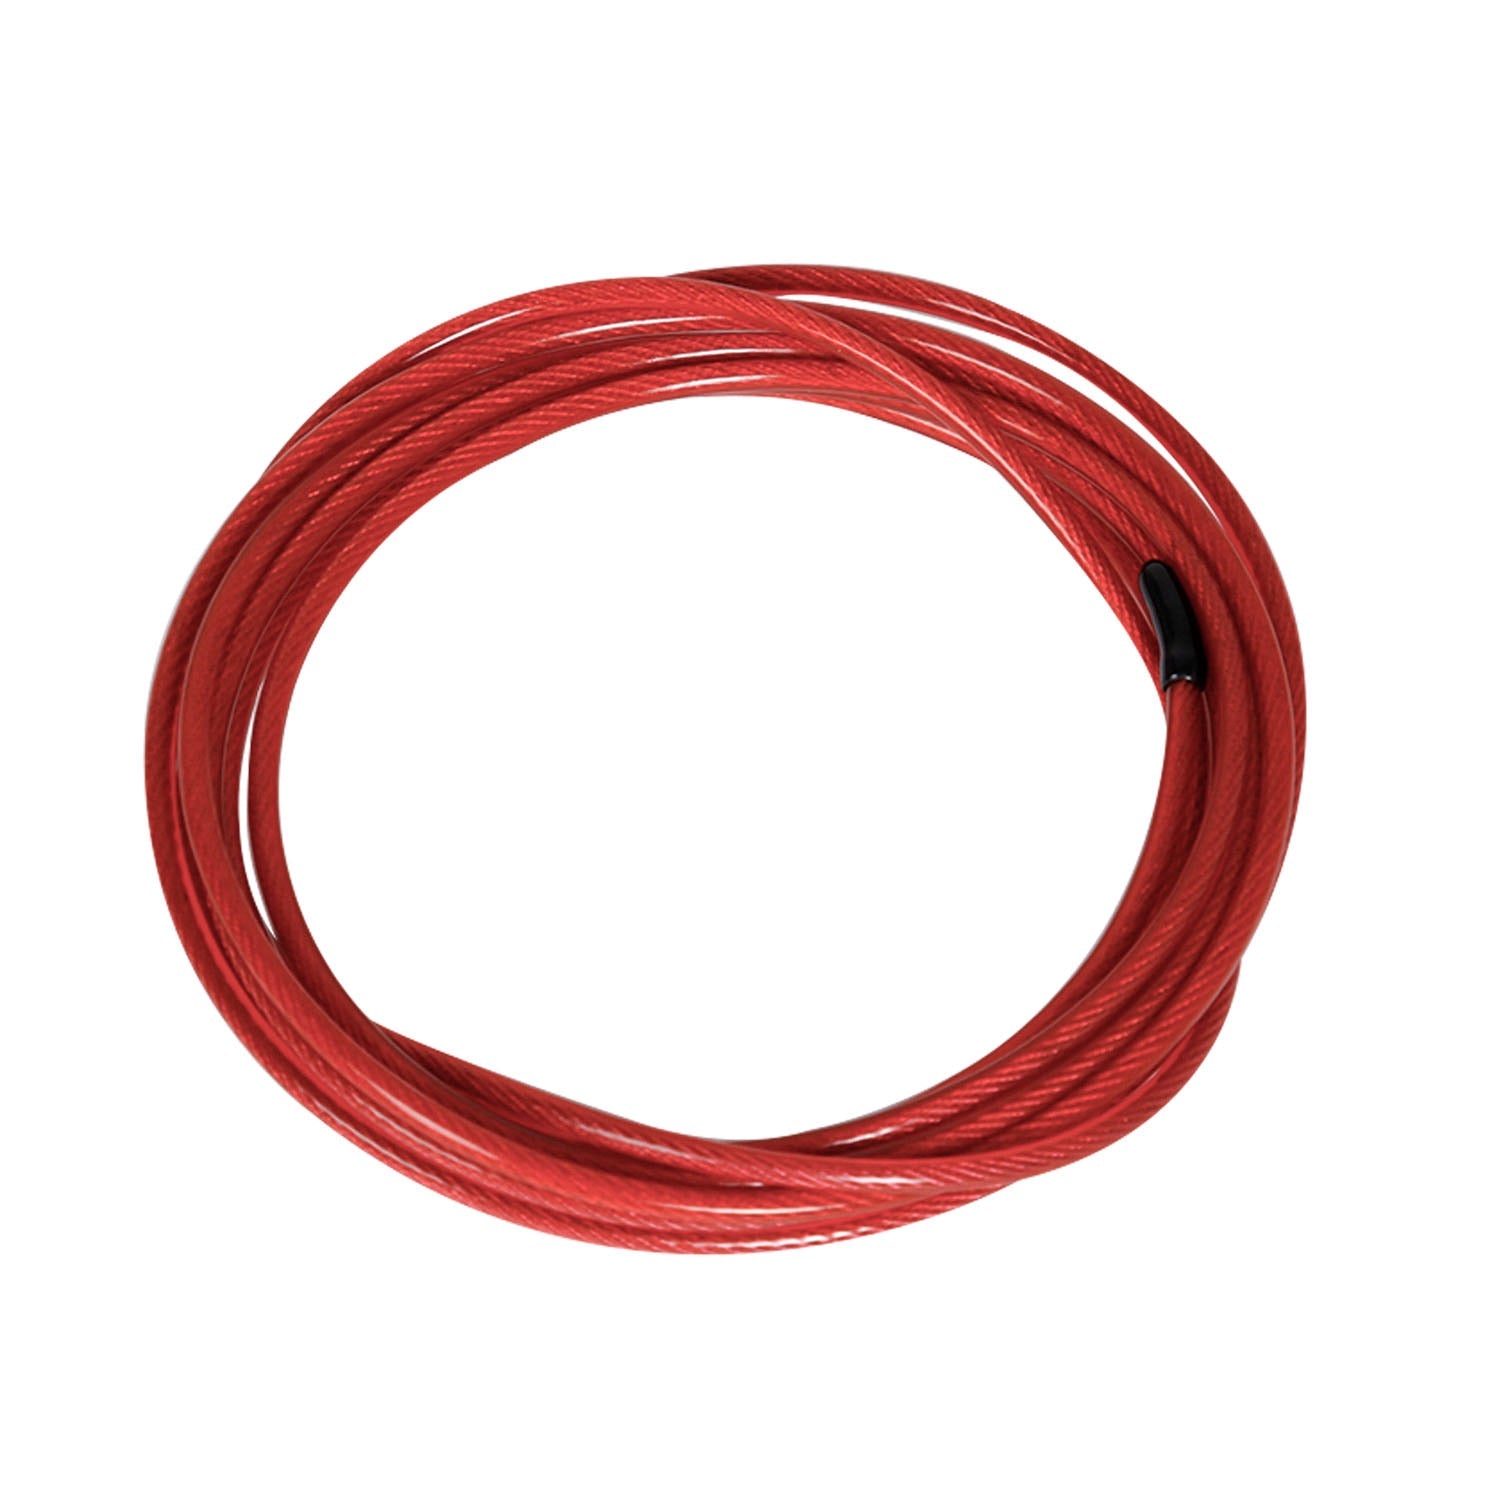 GND SR Skipping Rope Replacement Rope // Red 3.4mm - SR Skipping Rope- GND Fitness